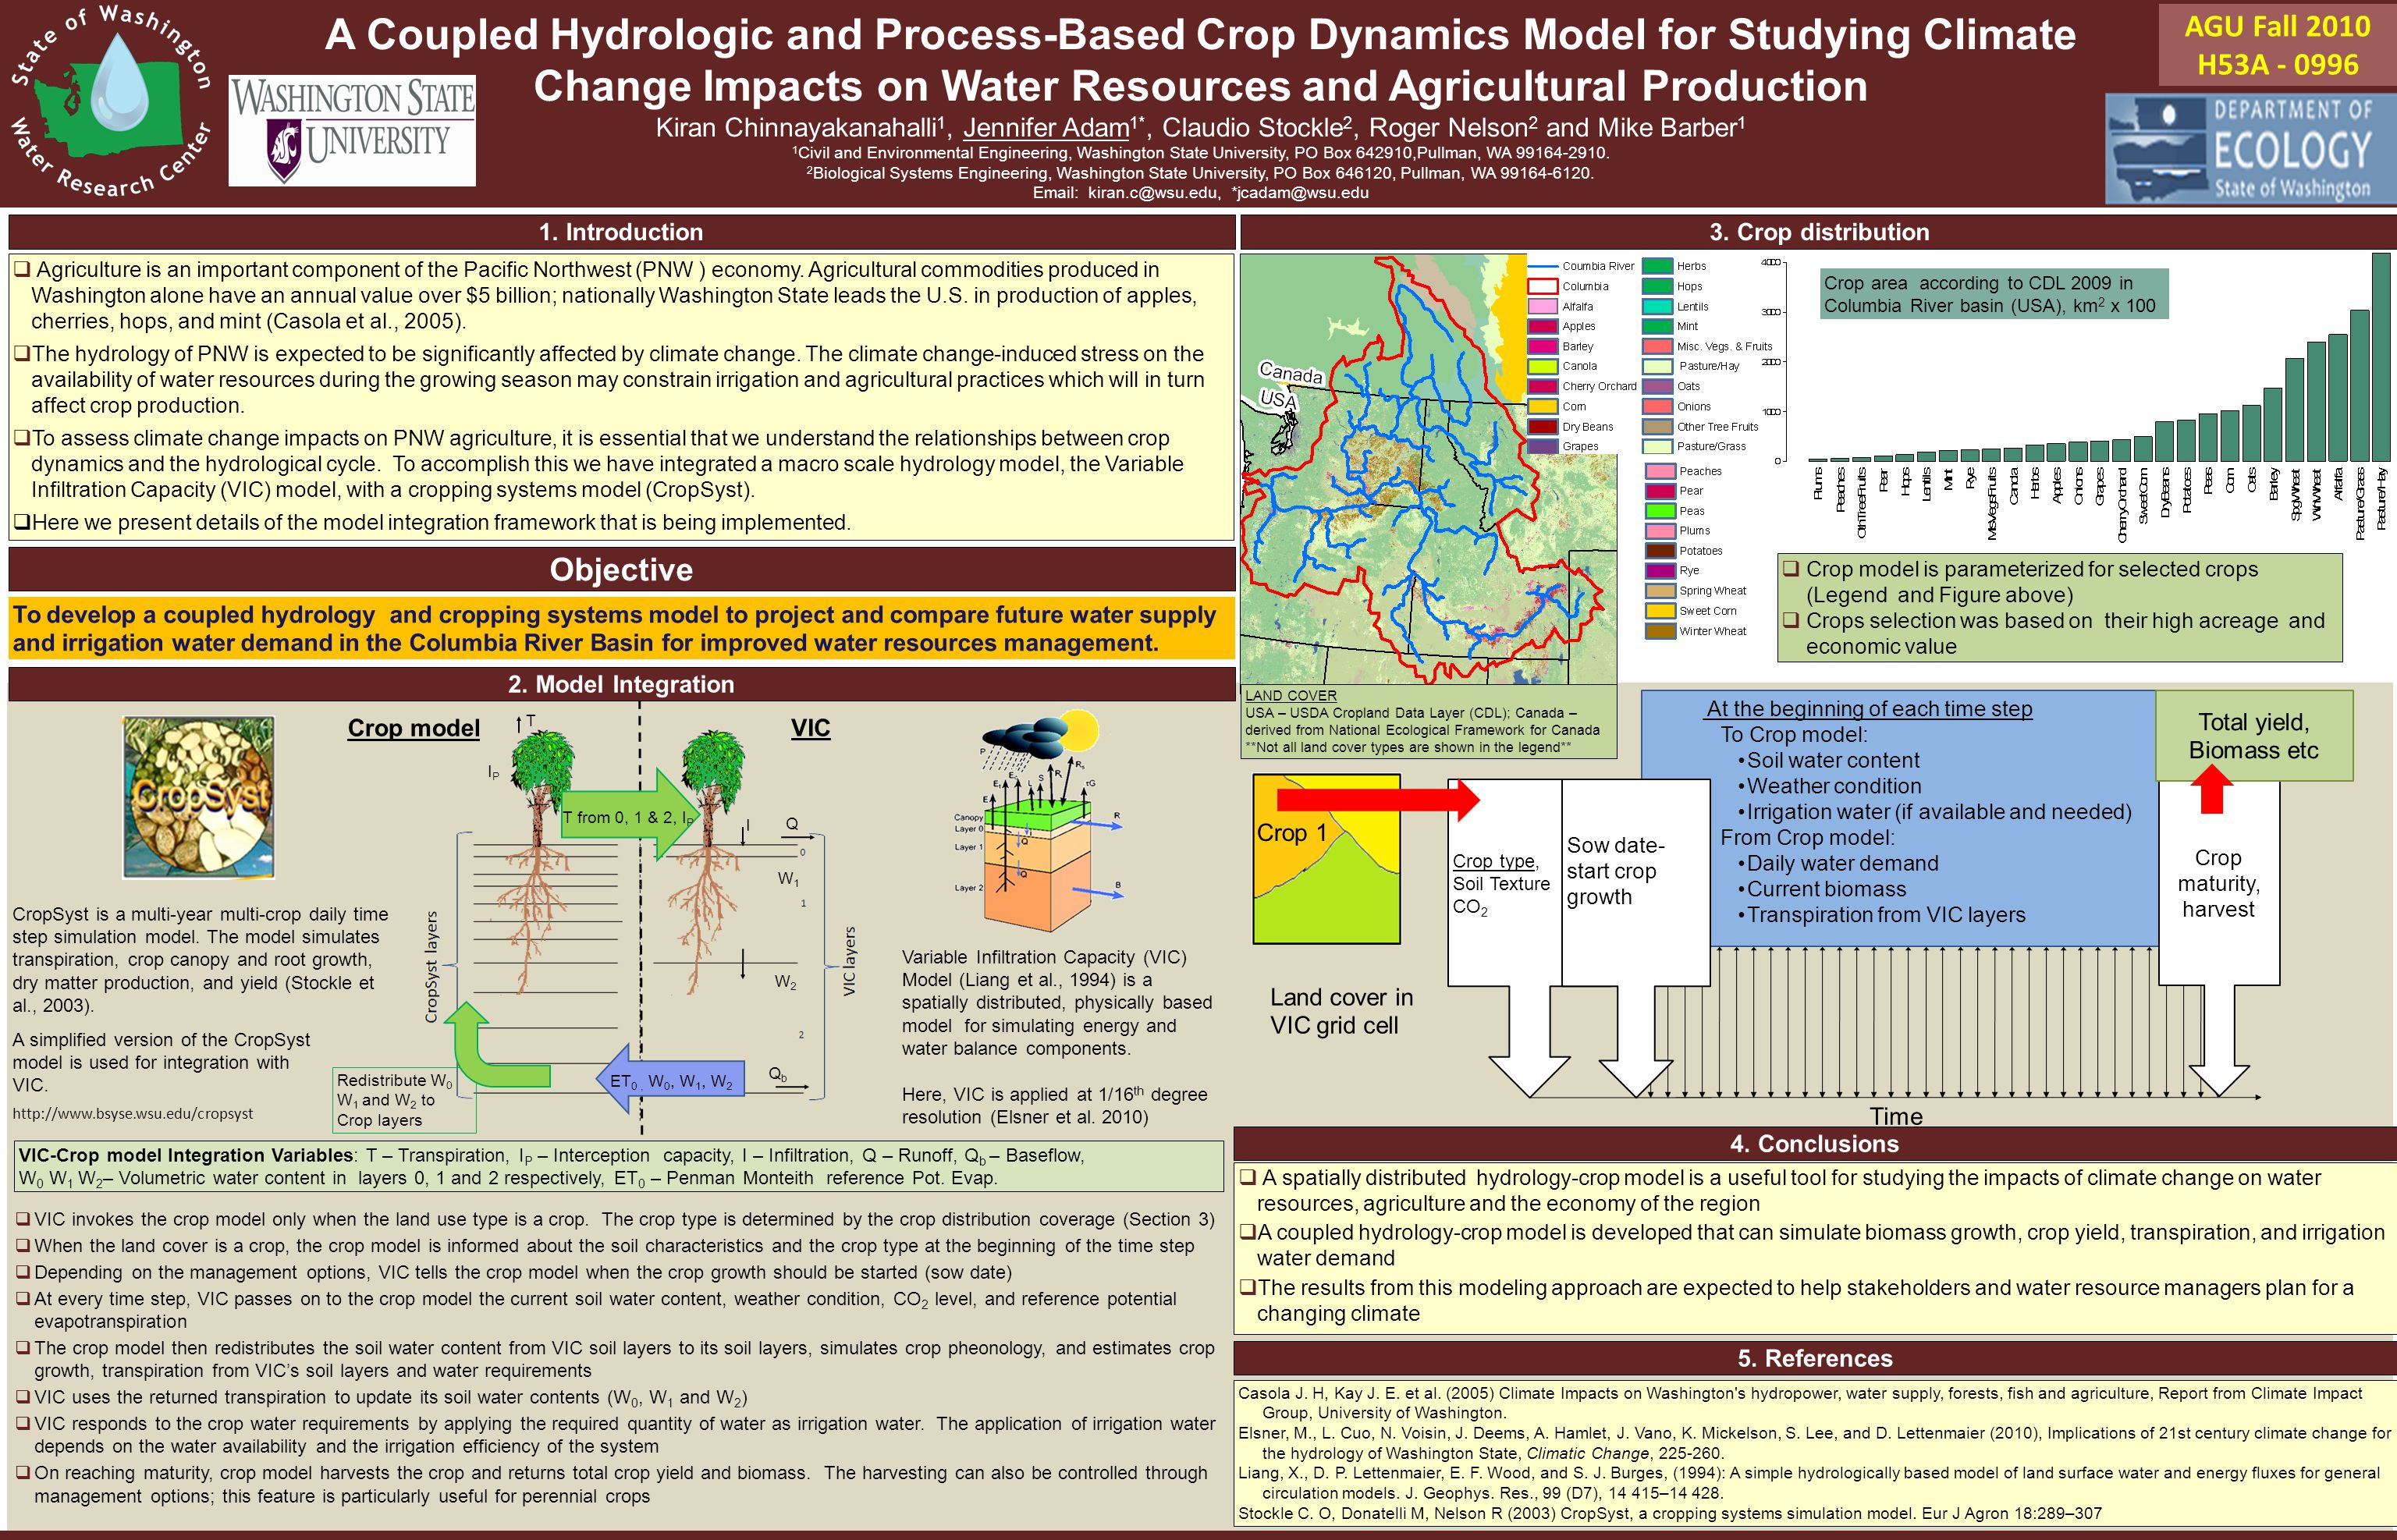 QbQb W2W2 T IPIP Redistribute W 0 W 1 and W 2 to Crop layers Q W1W1 ET 0, W 0, W 1, W 2 I T from 0, 1 & 2, I P A Coupled Hydrologic and Process-Based Crop Dynamics Model for Studying Climate Change Impacts on Water Resources and Agricultural Production Kiran Chinnayakanahalli 1, Jennifer Adam 1*, Claudio Stockle 2, Roger Nelson 2 and Mike Barber 1 1 Civil and Environmental Engineering, Washington State University, PO Box ,Pullman, WA